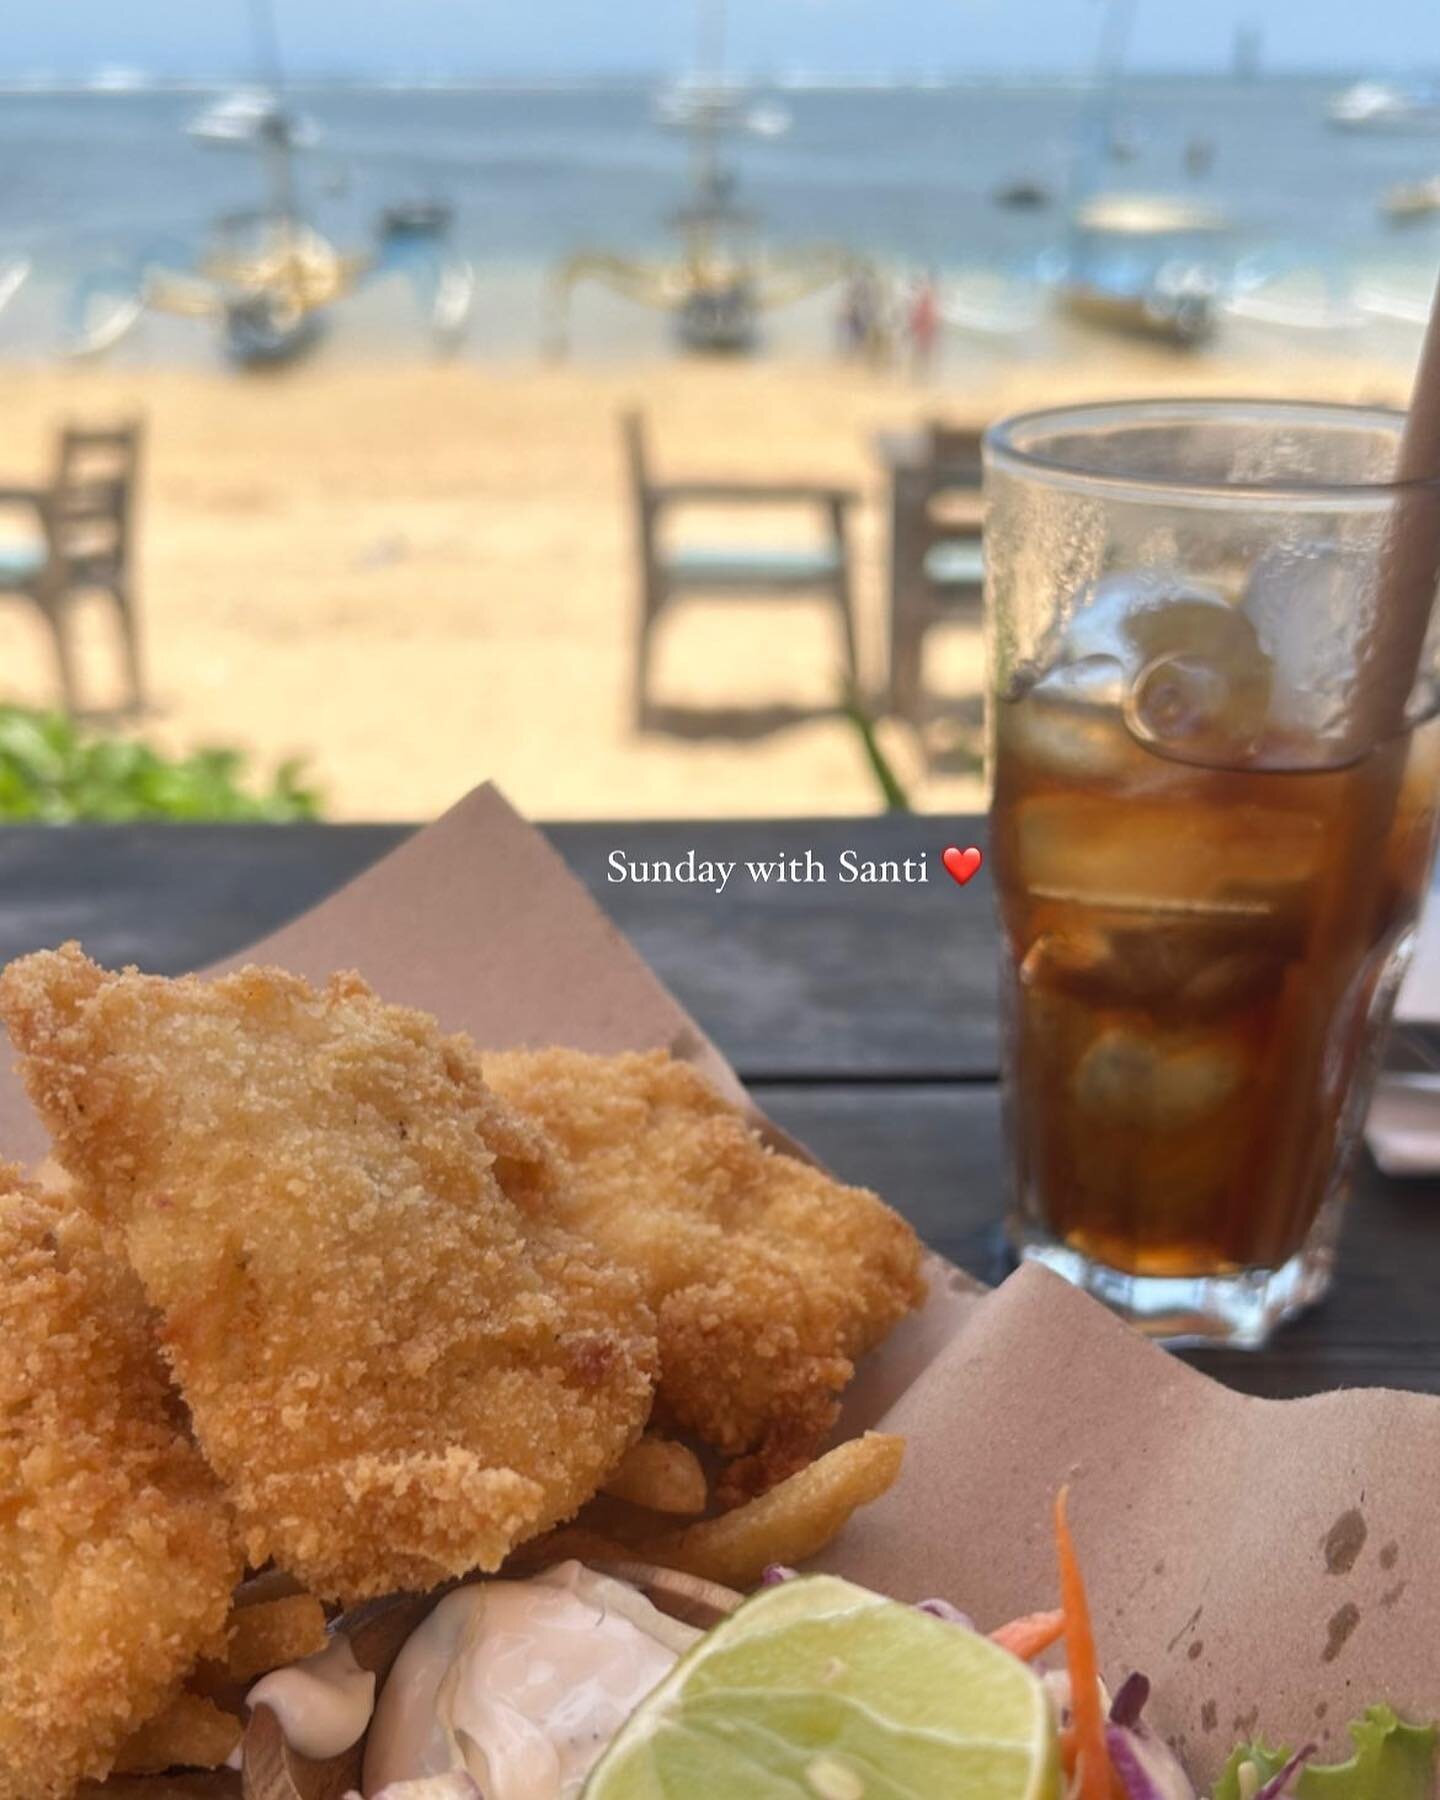 I&rsquo;m the luckiest mum in the world. Fish and chips by the beach on a sunny Sunday. When you know life is smiling with you.

Thanks @santi.ardika